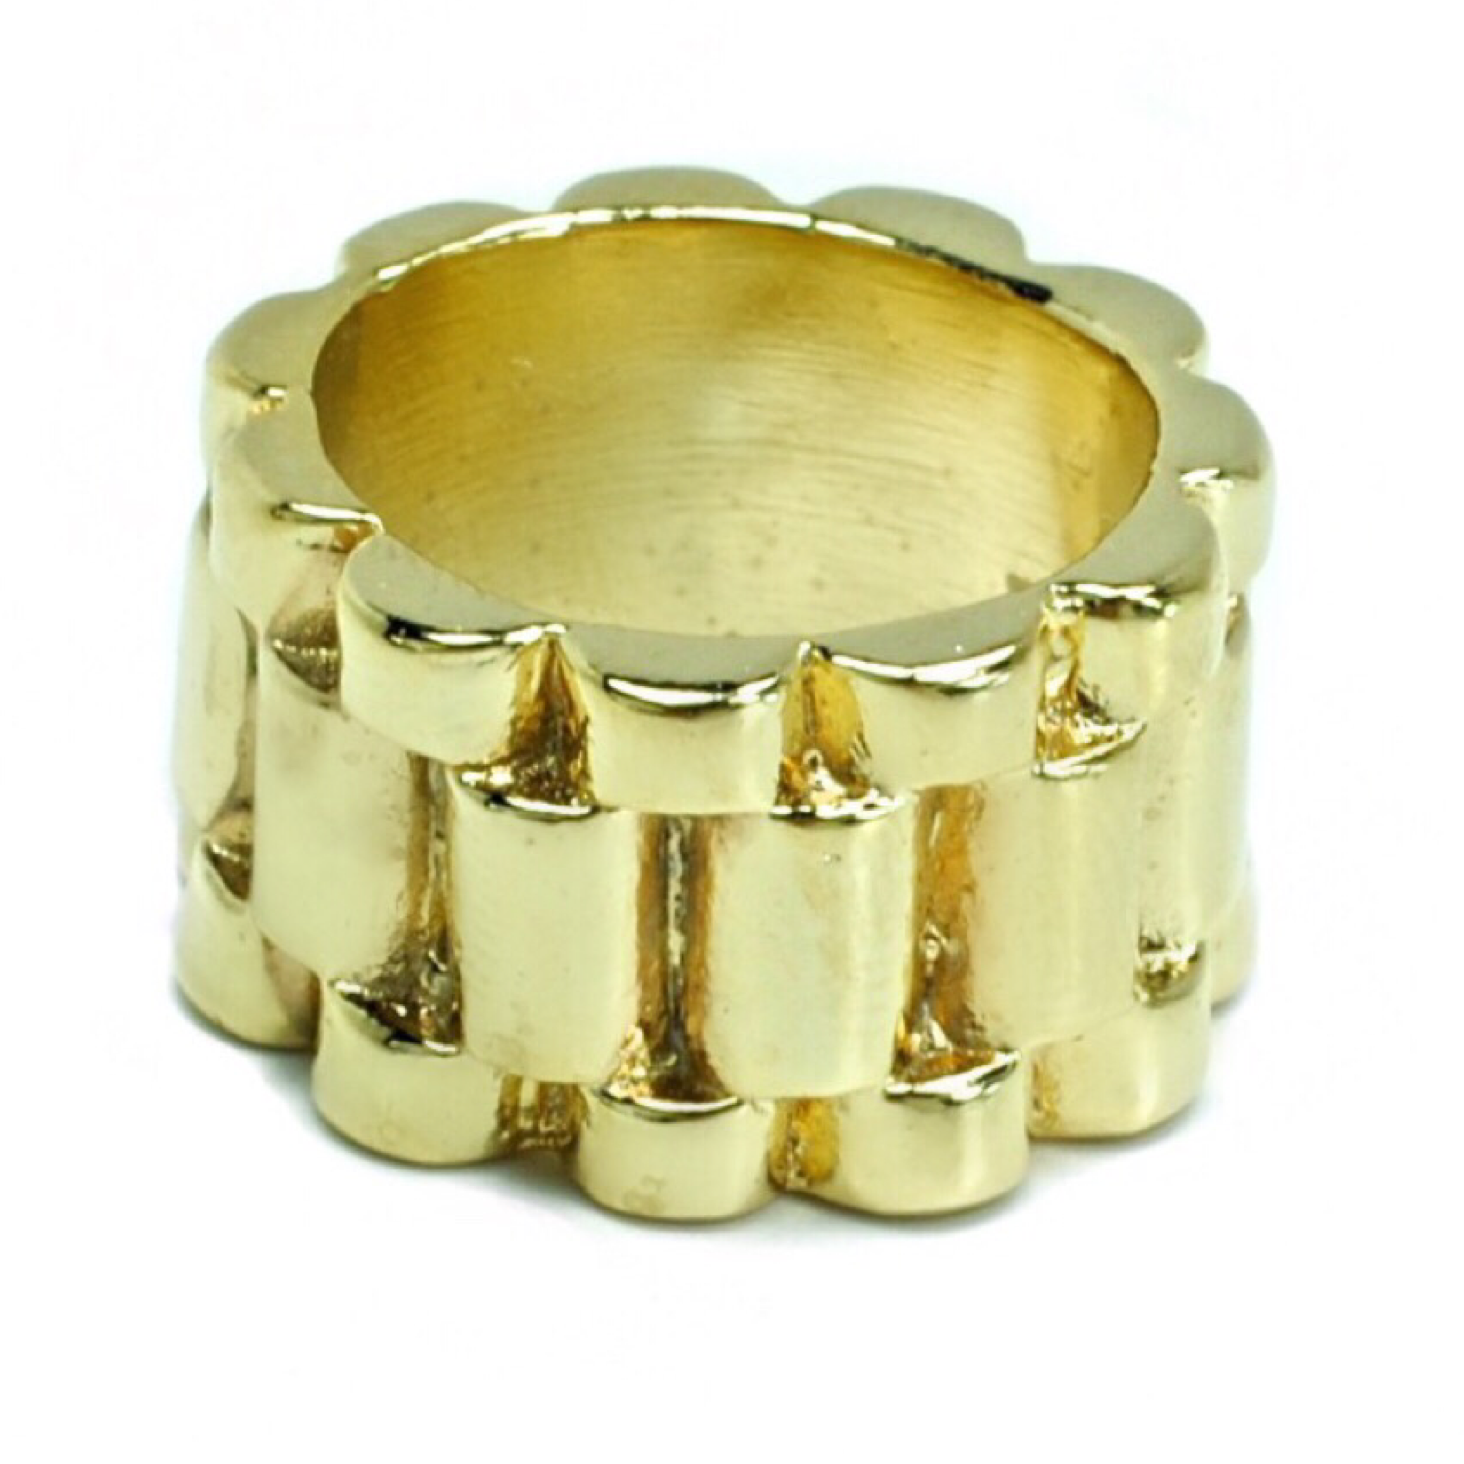 Rolex Link Ring in 14k Gold plated 